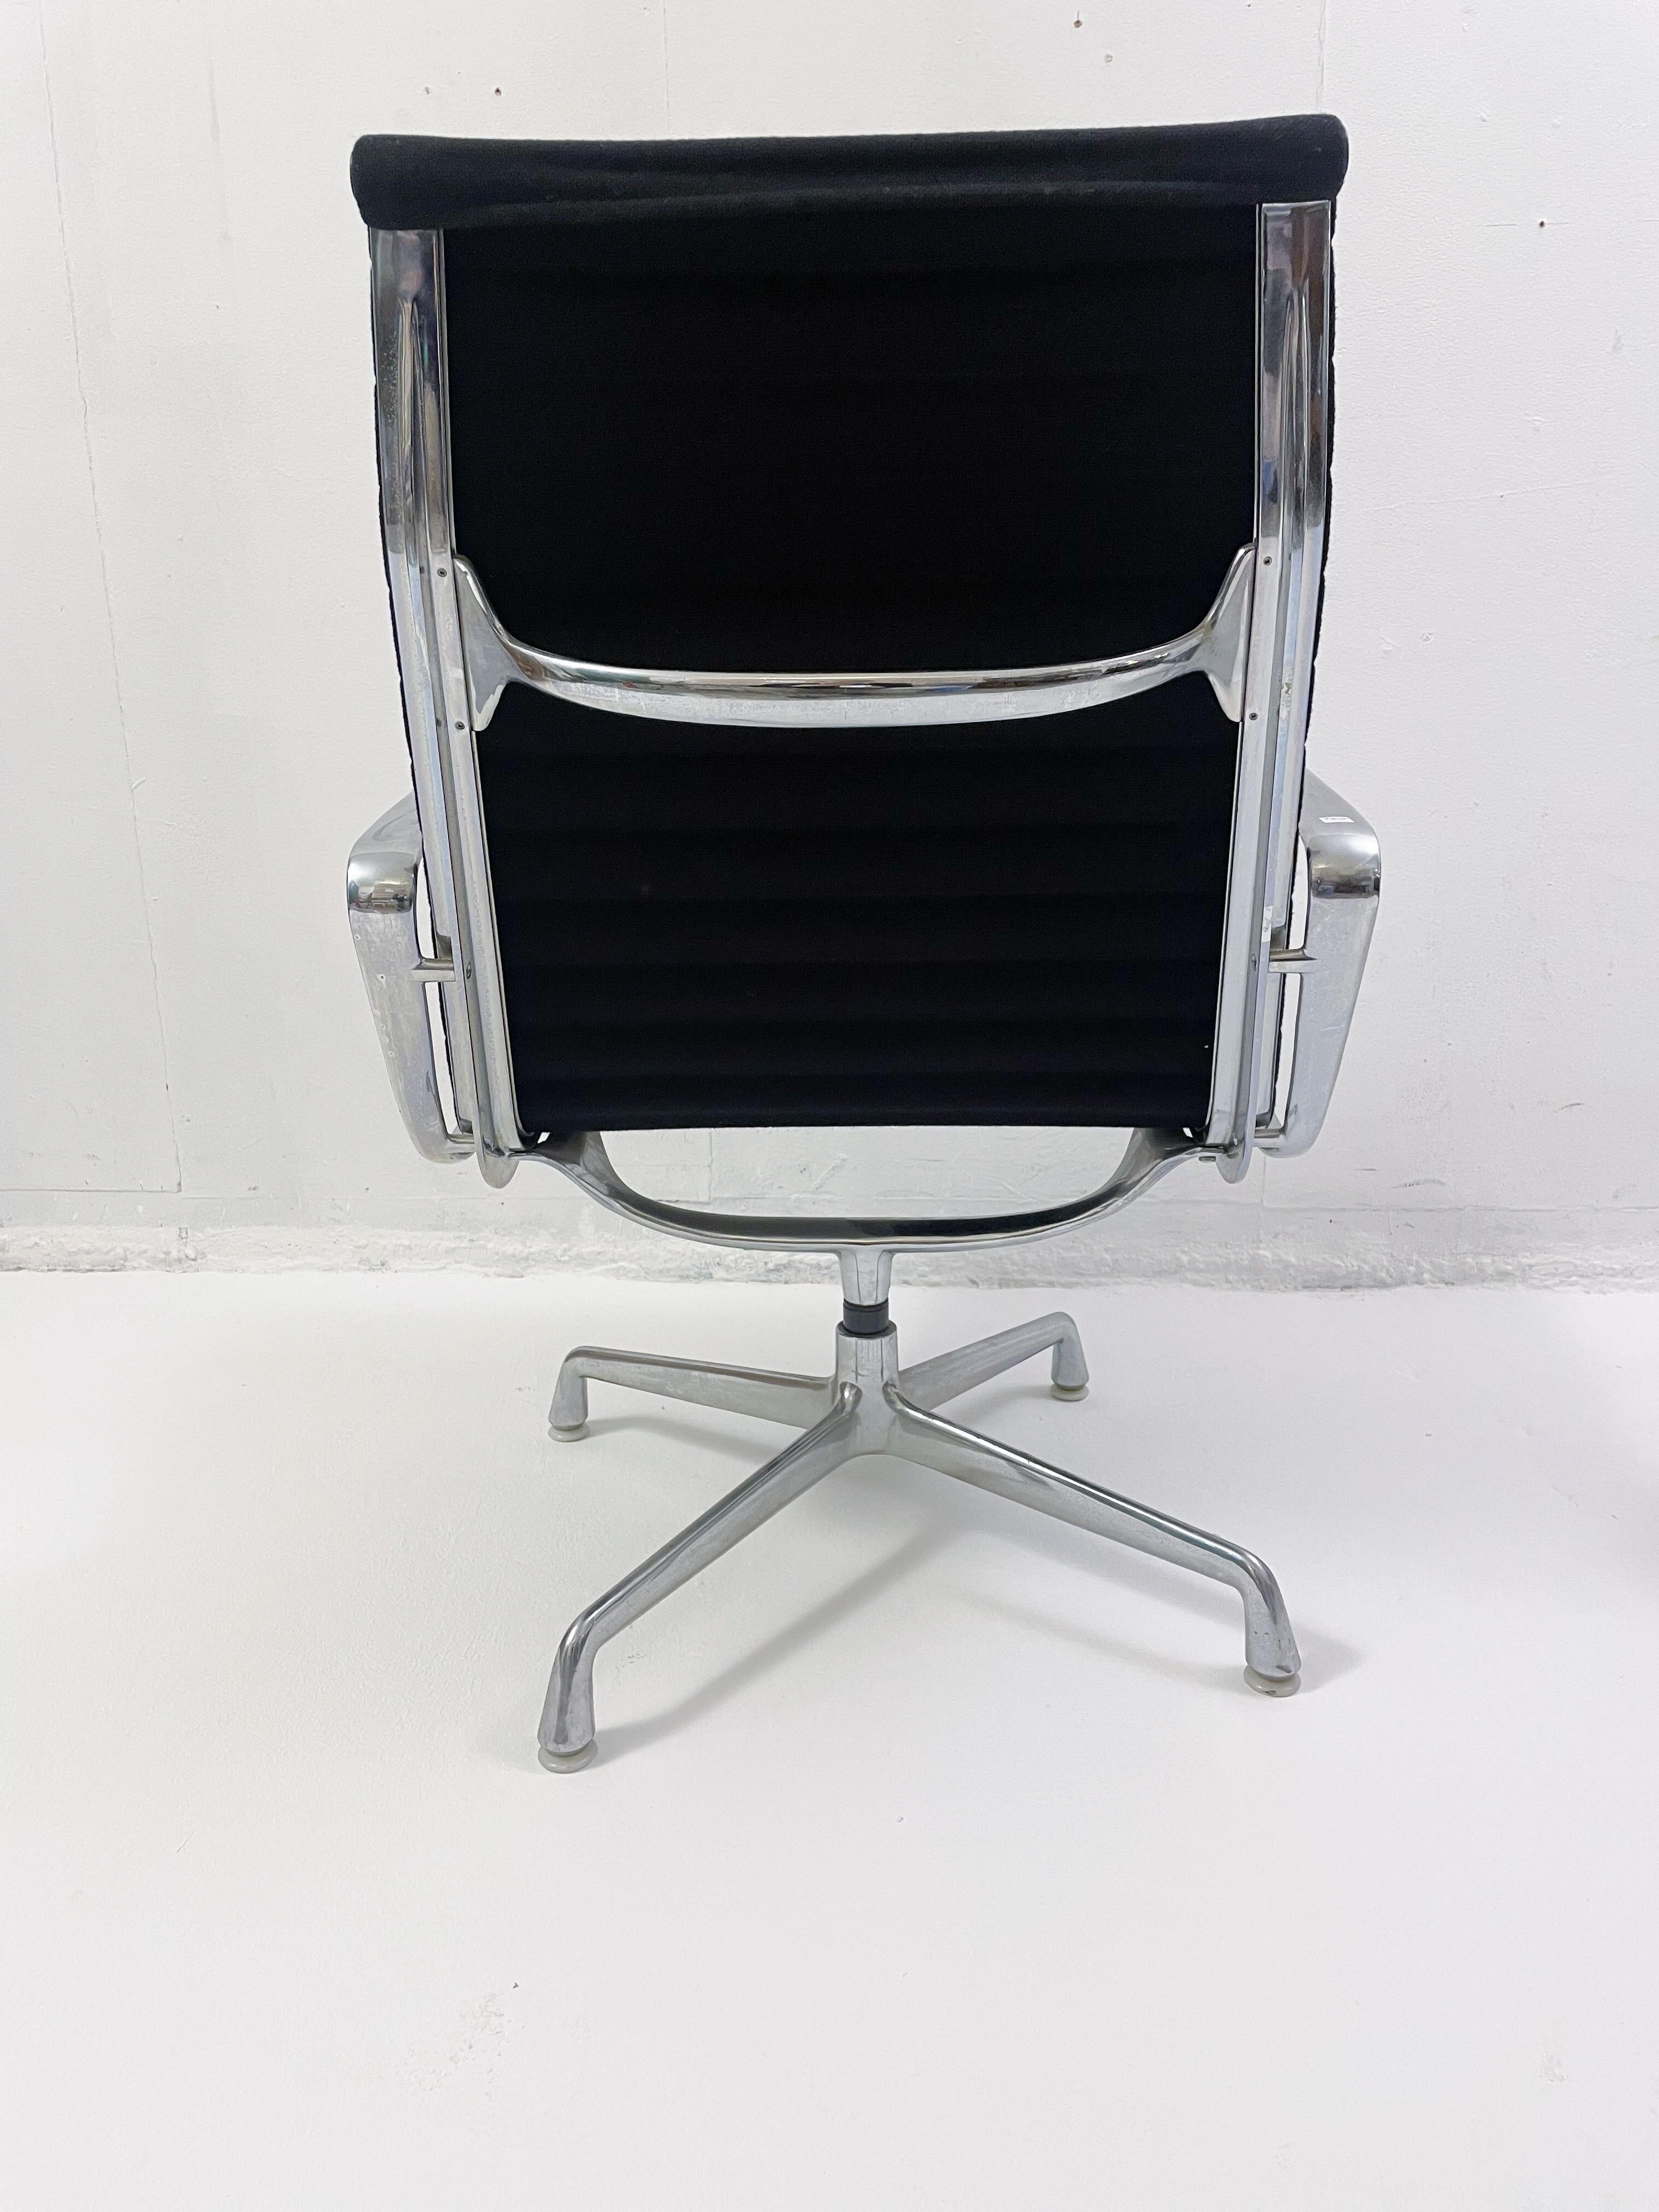 Eames Desk Chair EA 117 by Herman Miller, 1990s - 3 available.